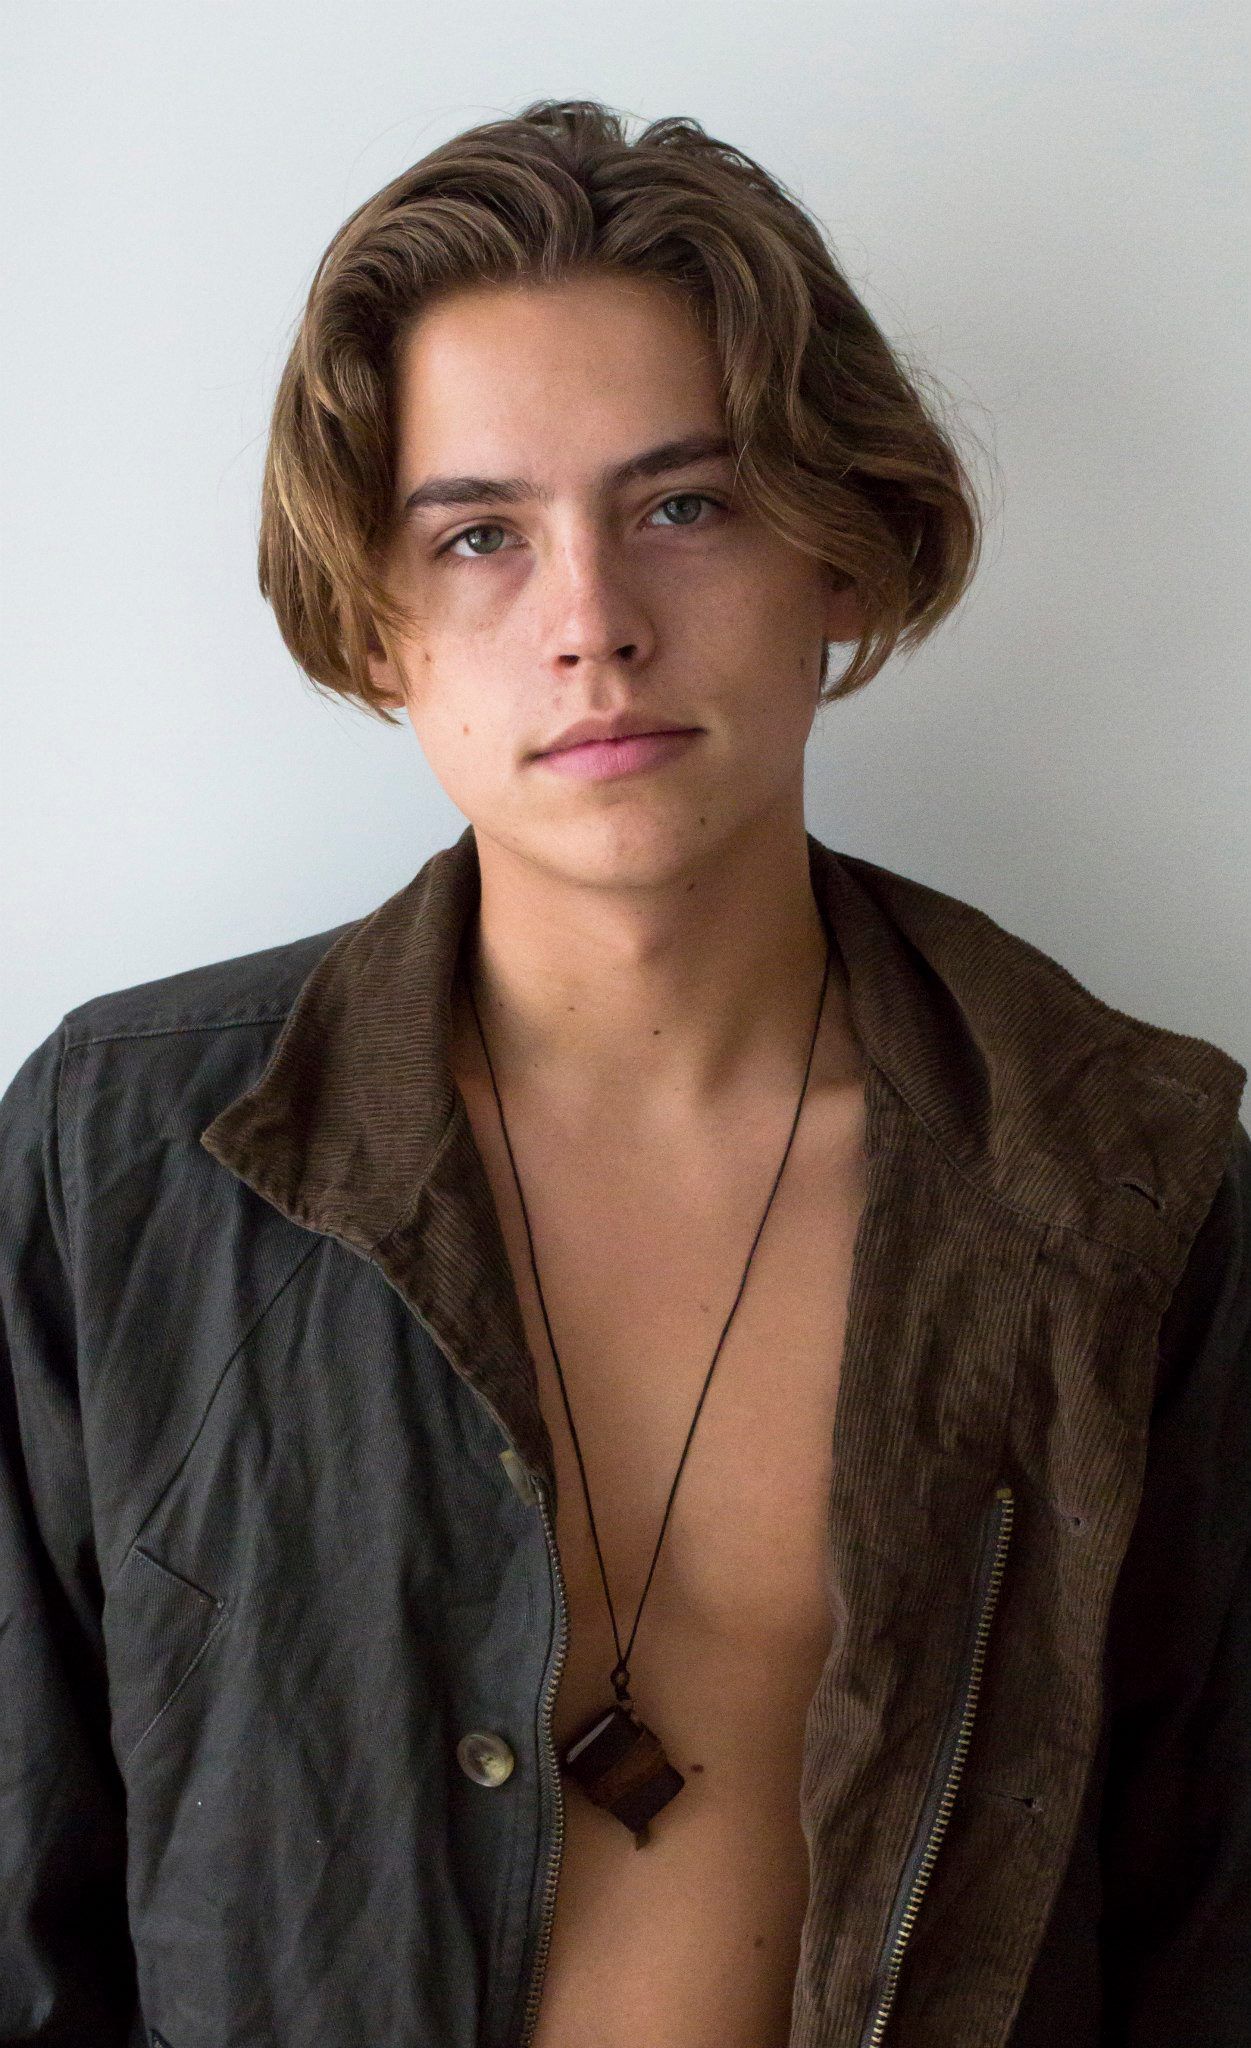 Cole Sprouse Hollywood Celebrities Wallpapers For IPhone 6 Download.